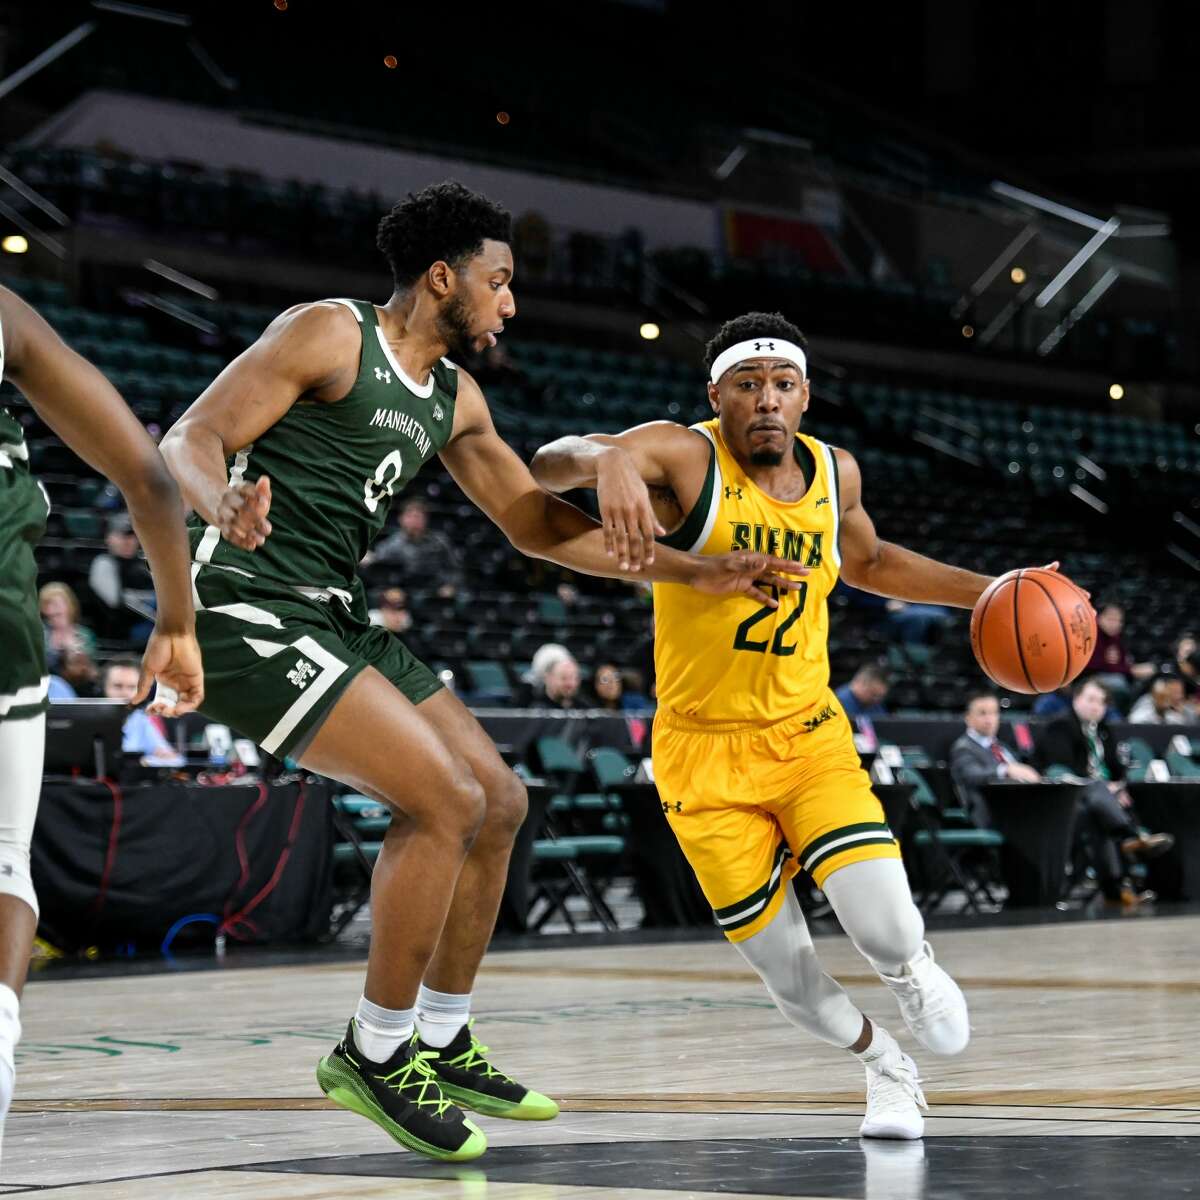 Jalen Pickett of Siena drives to the basket against Manhattan in the quarterfinals of the Metro Atlantic Athletic Conference Tournament on Wednesday, March 11, 2020, in Atlantic City, N.J. (Chuck Marvel / Special to the Times Union)